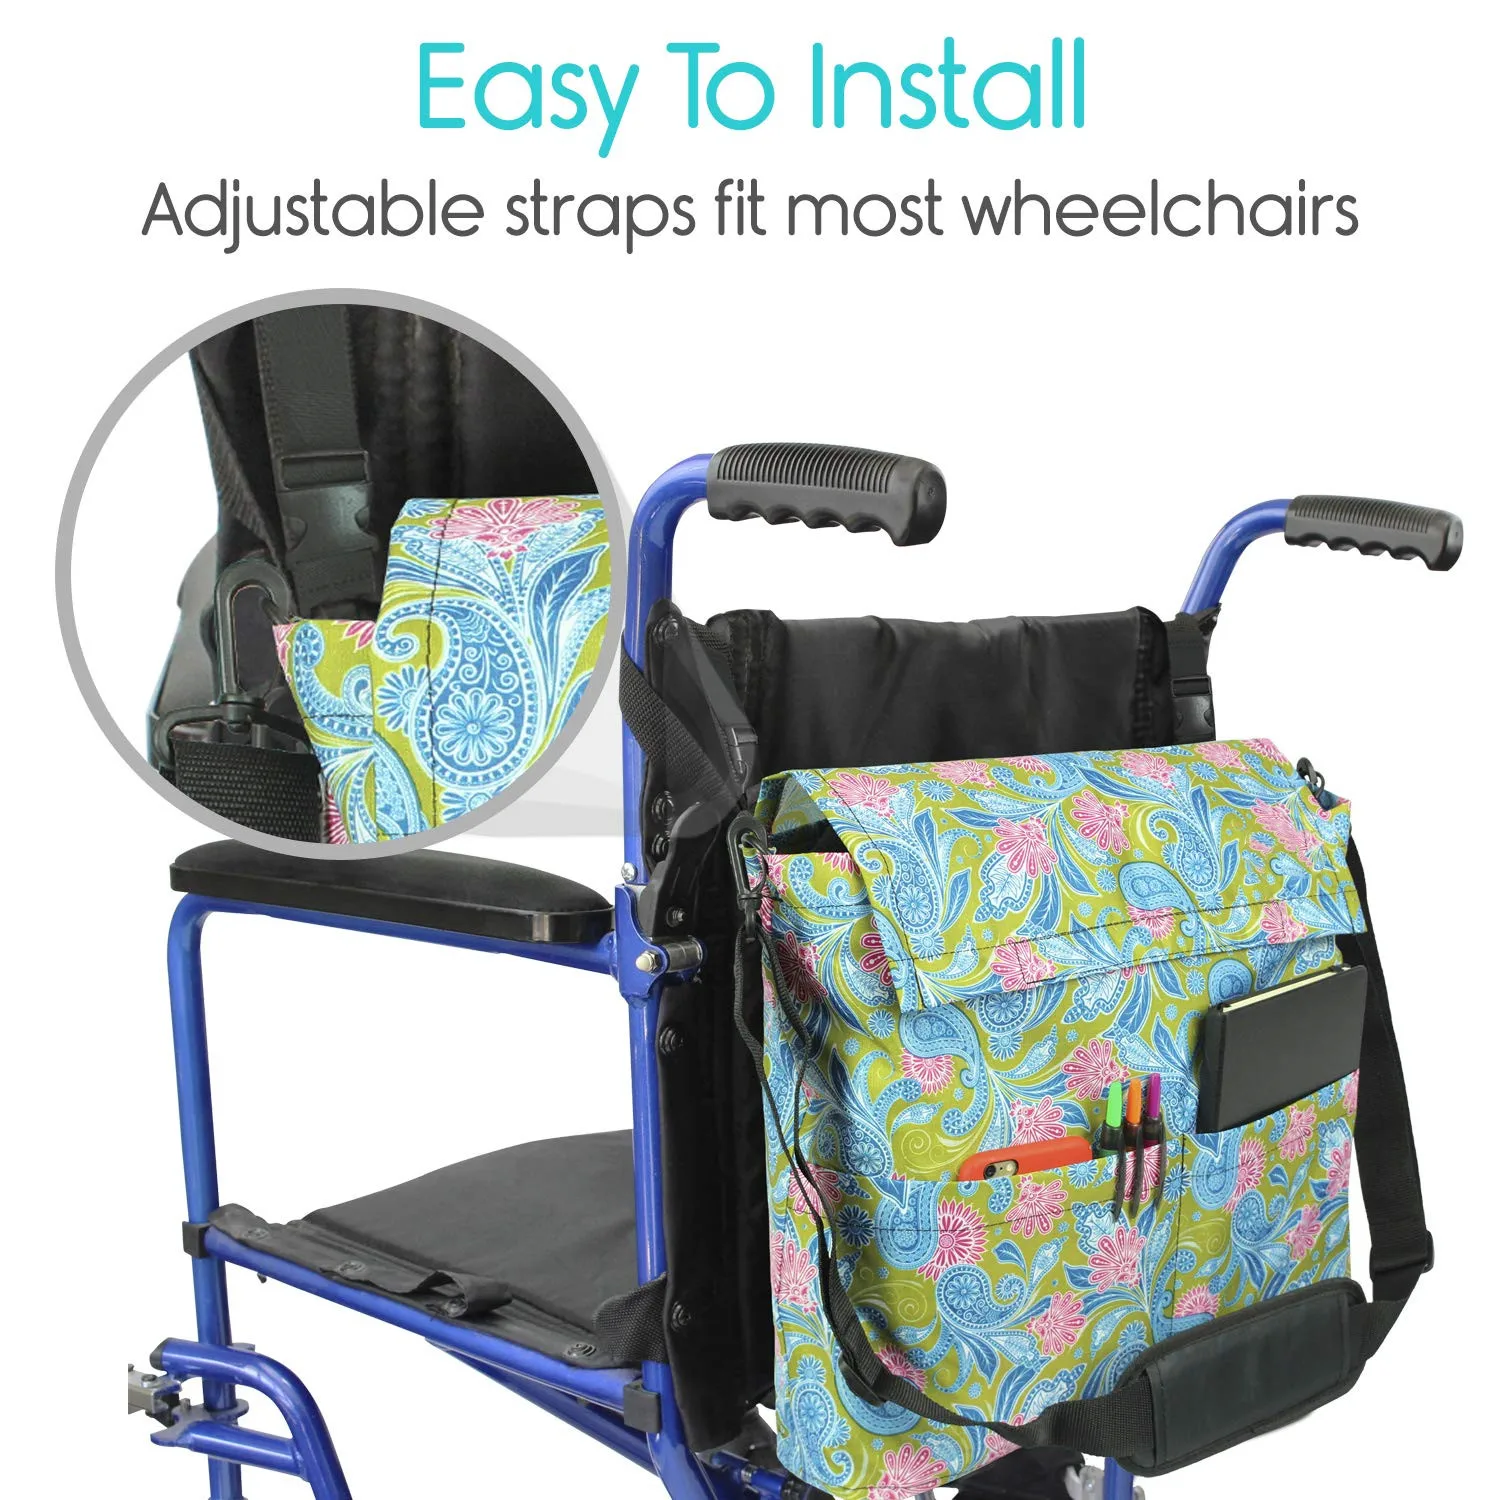 Wheelchair Bag - Wheel Chair Storage Tote Accessory for Carrying Loose Items and Accessories